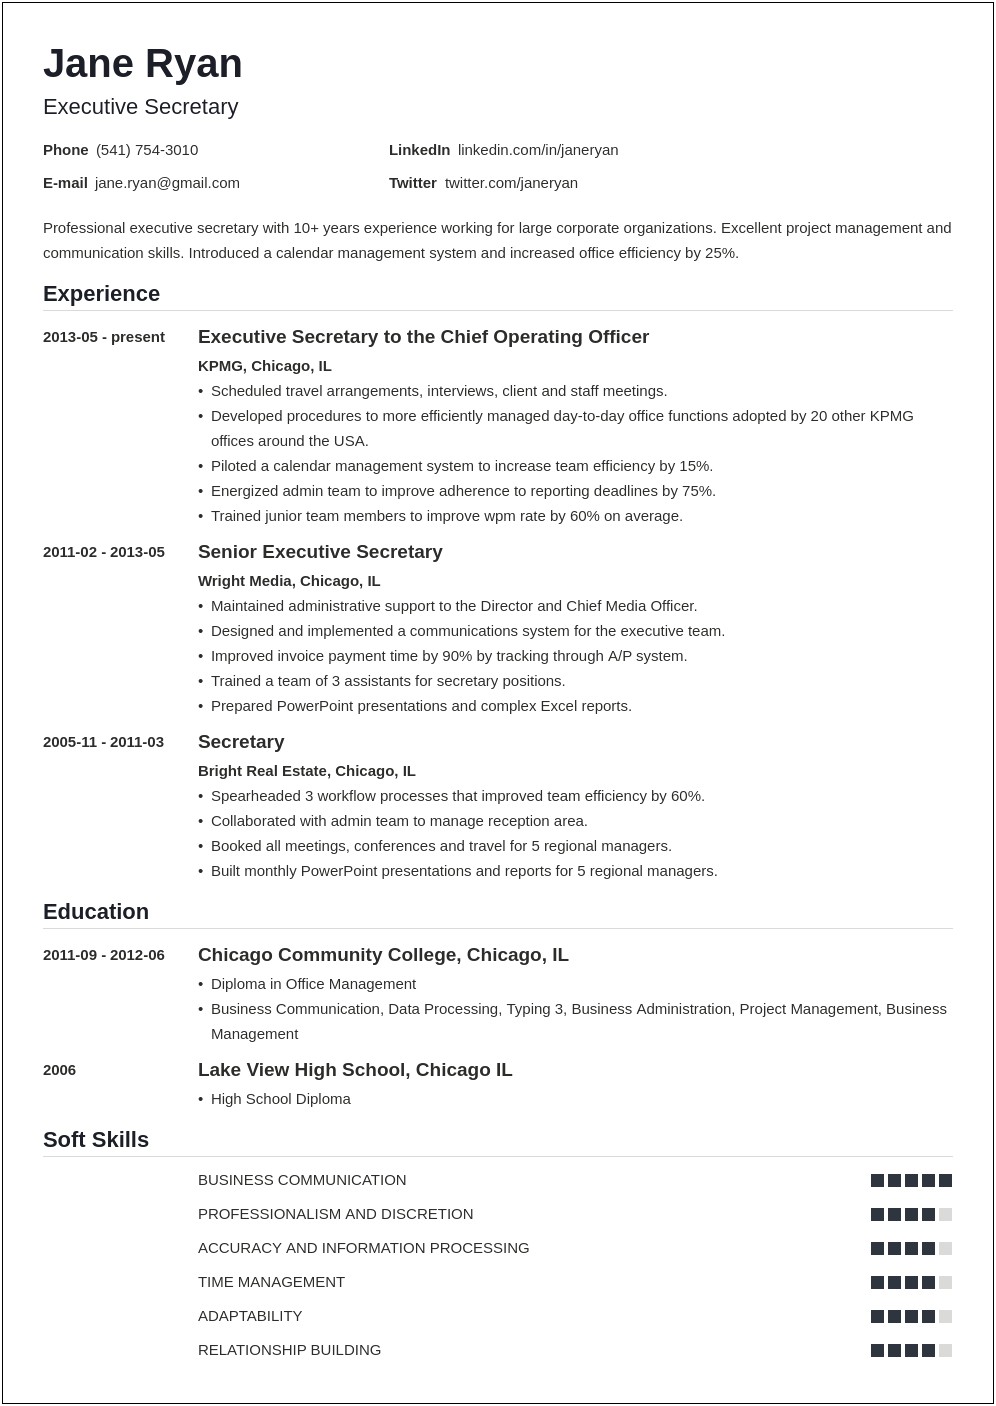 Resume Objective Examples For School Secretary Position